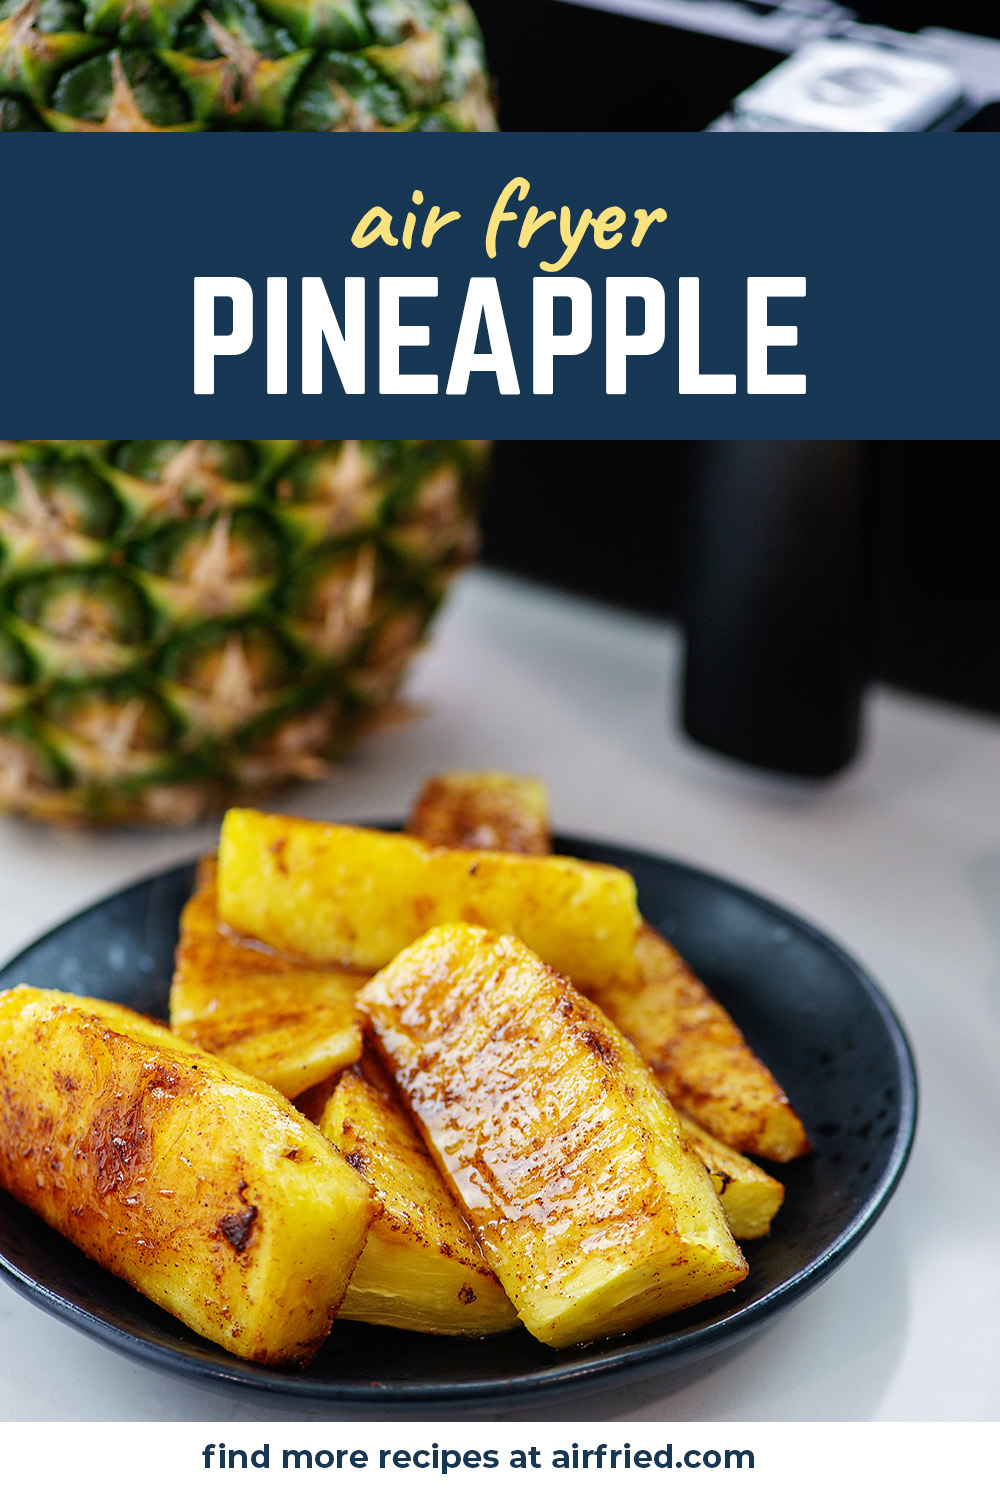 So sweet, with a very unique taste!  This air fried pineapple is superb!